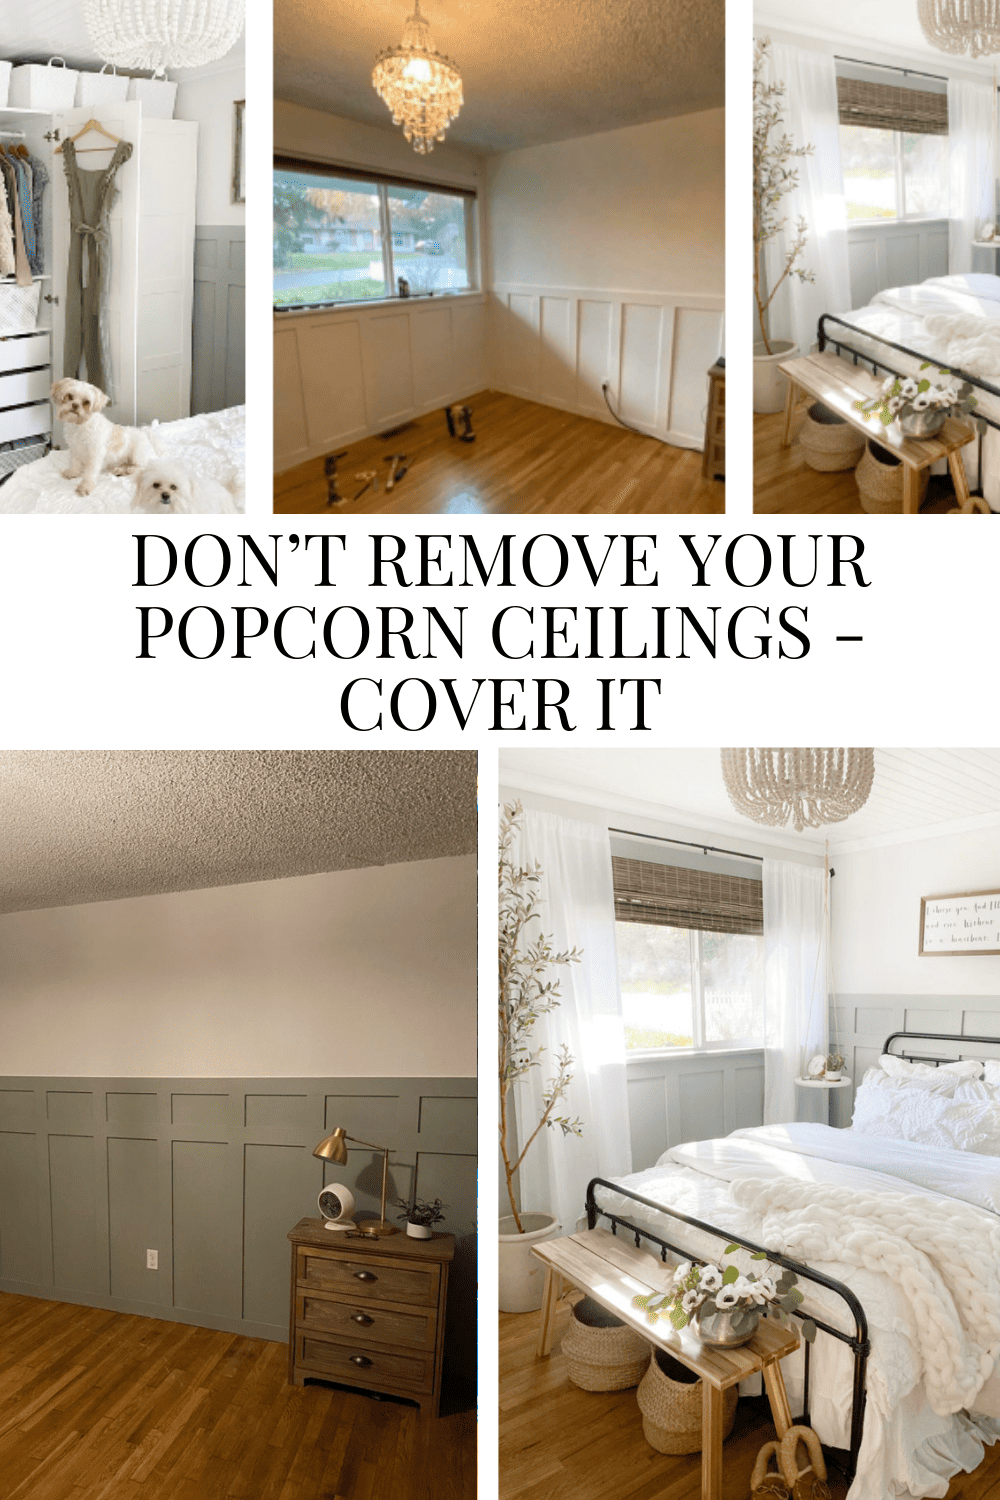 Don't Remove Your Popcorn Ceilings - Cover It!